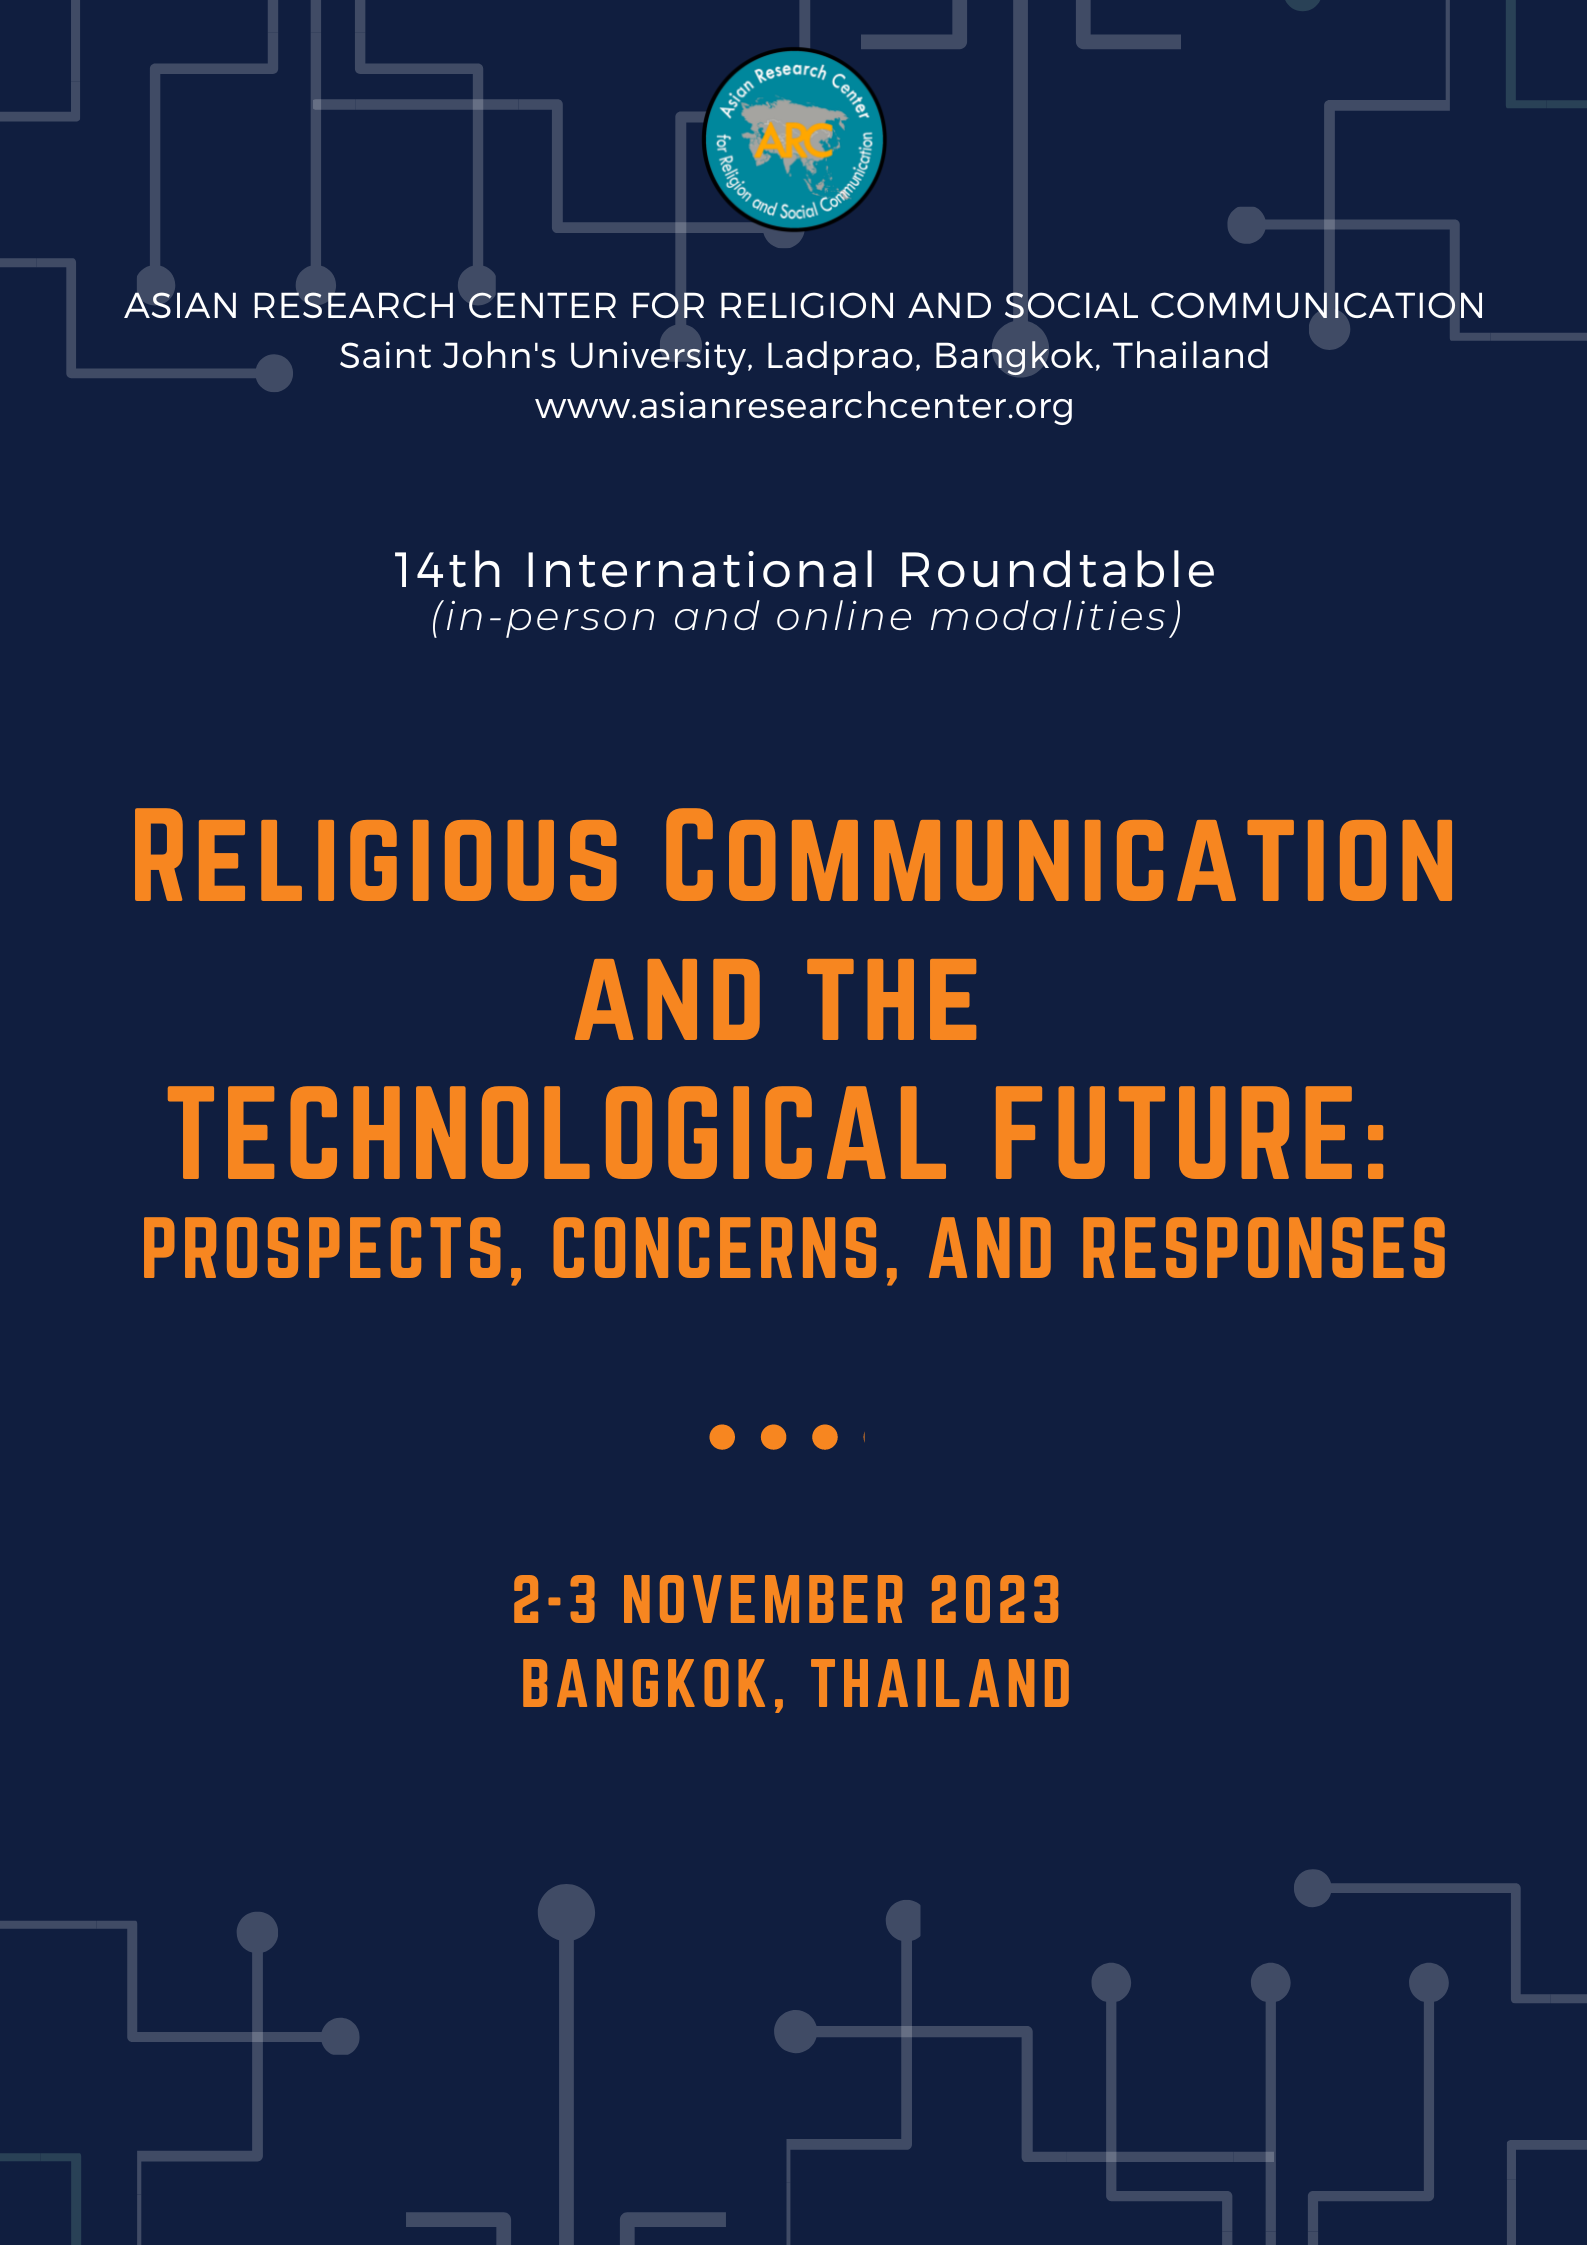 1674611733-religious-communication-and-the-technological-future-prospects-concerns-and-responses-3.png